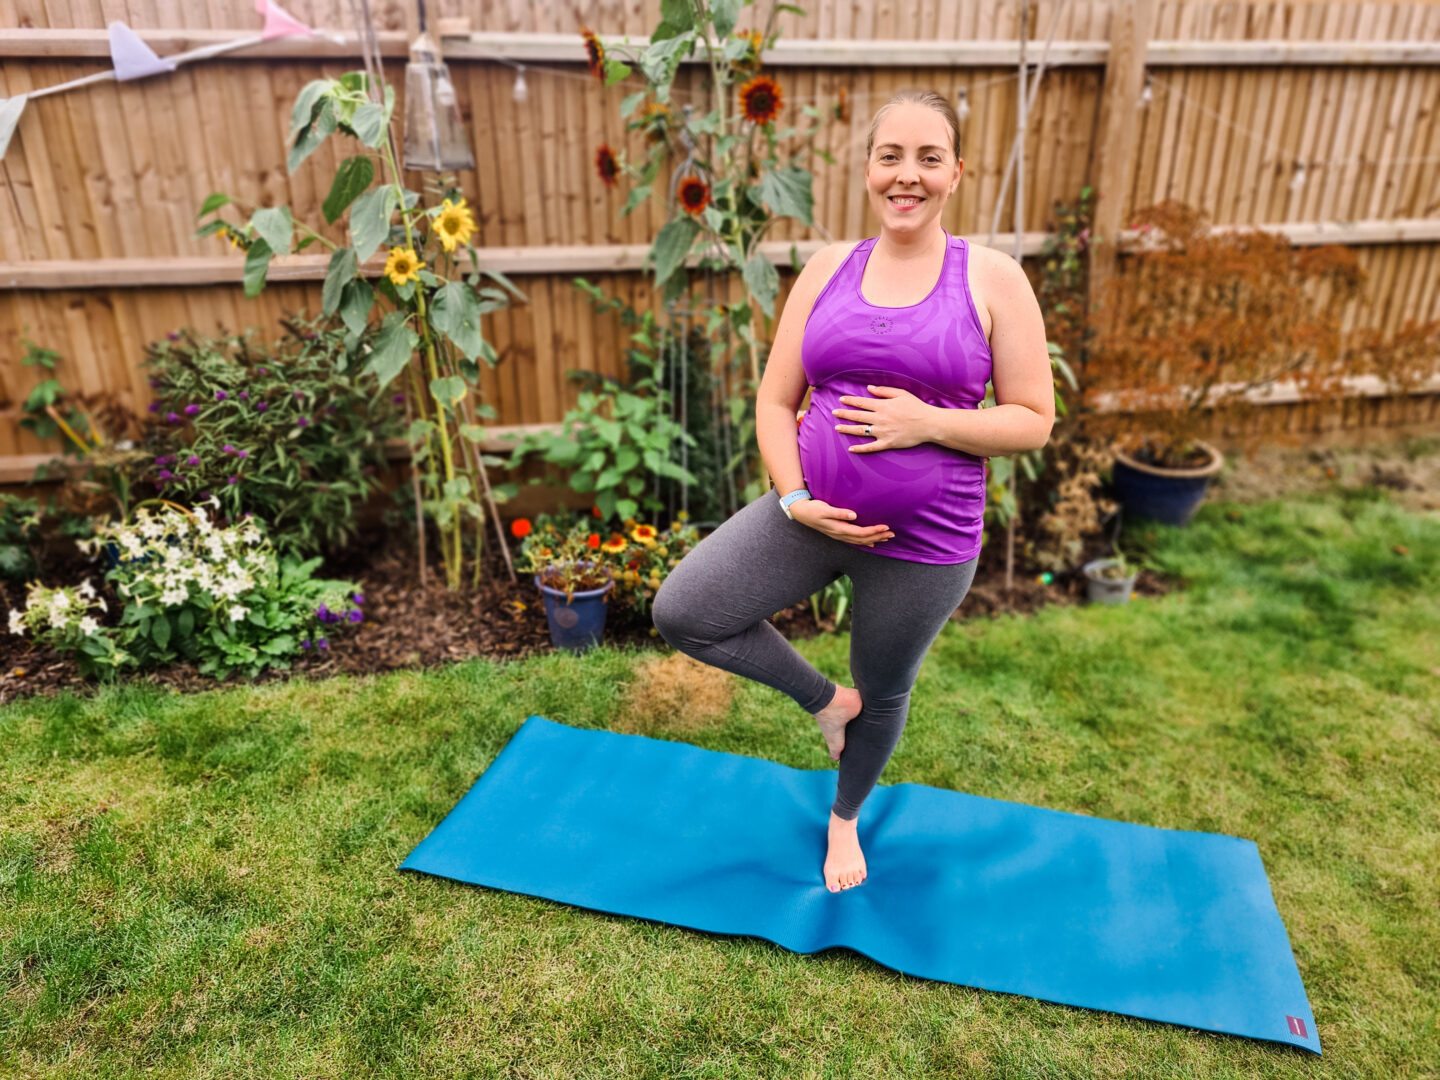 Pregnant woman standing on a yoga mat doing tree pose. She has her hands on her belly, and is wearing grey leggings and purple tank top. Behind her is a blurred background of grass and plants. 